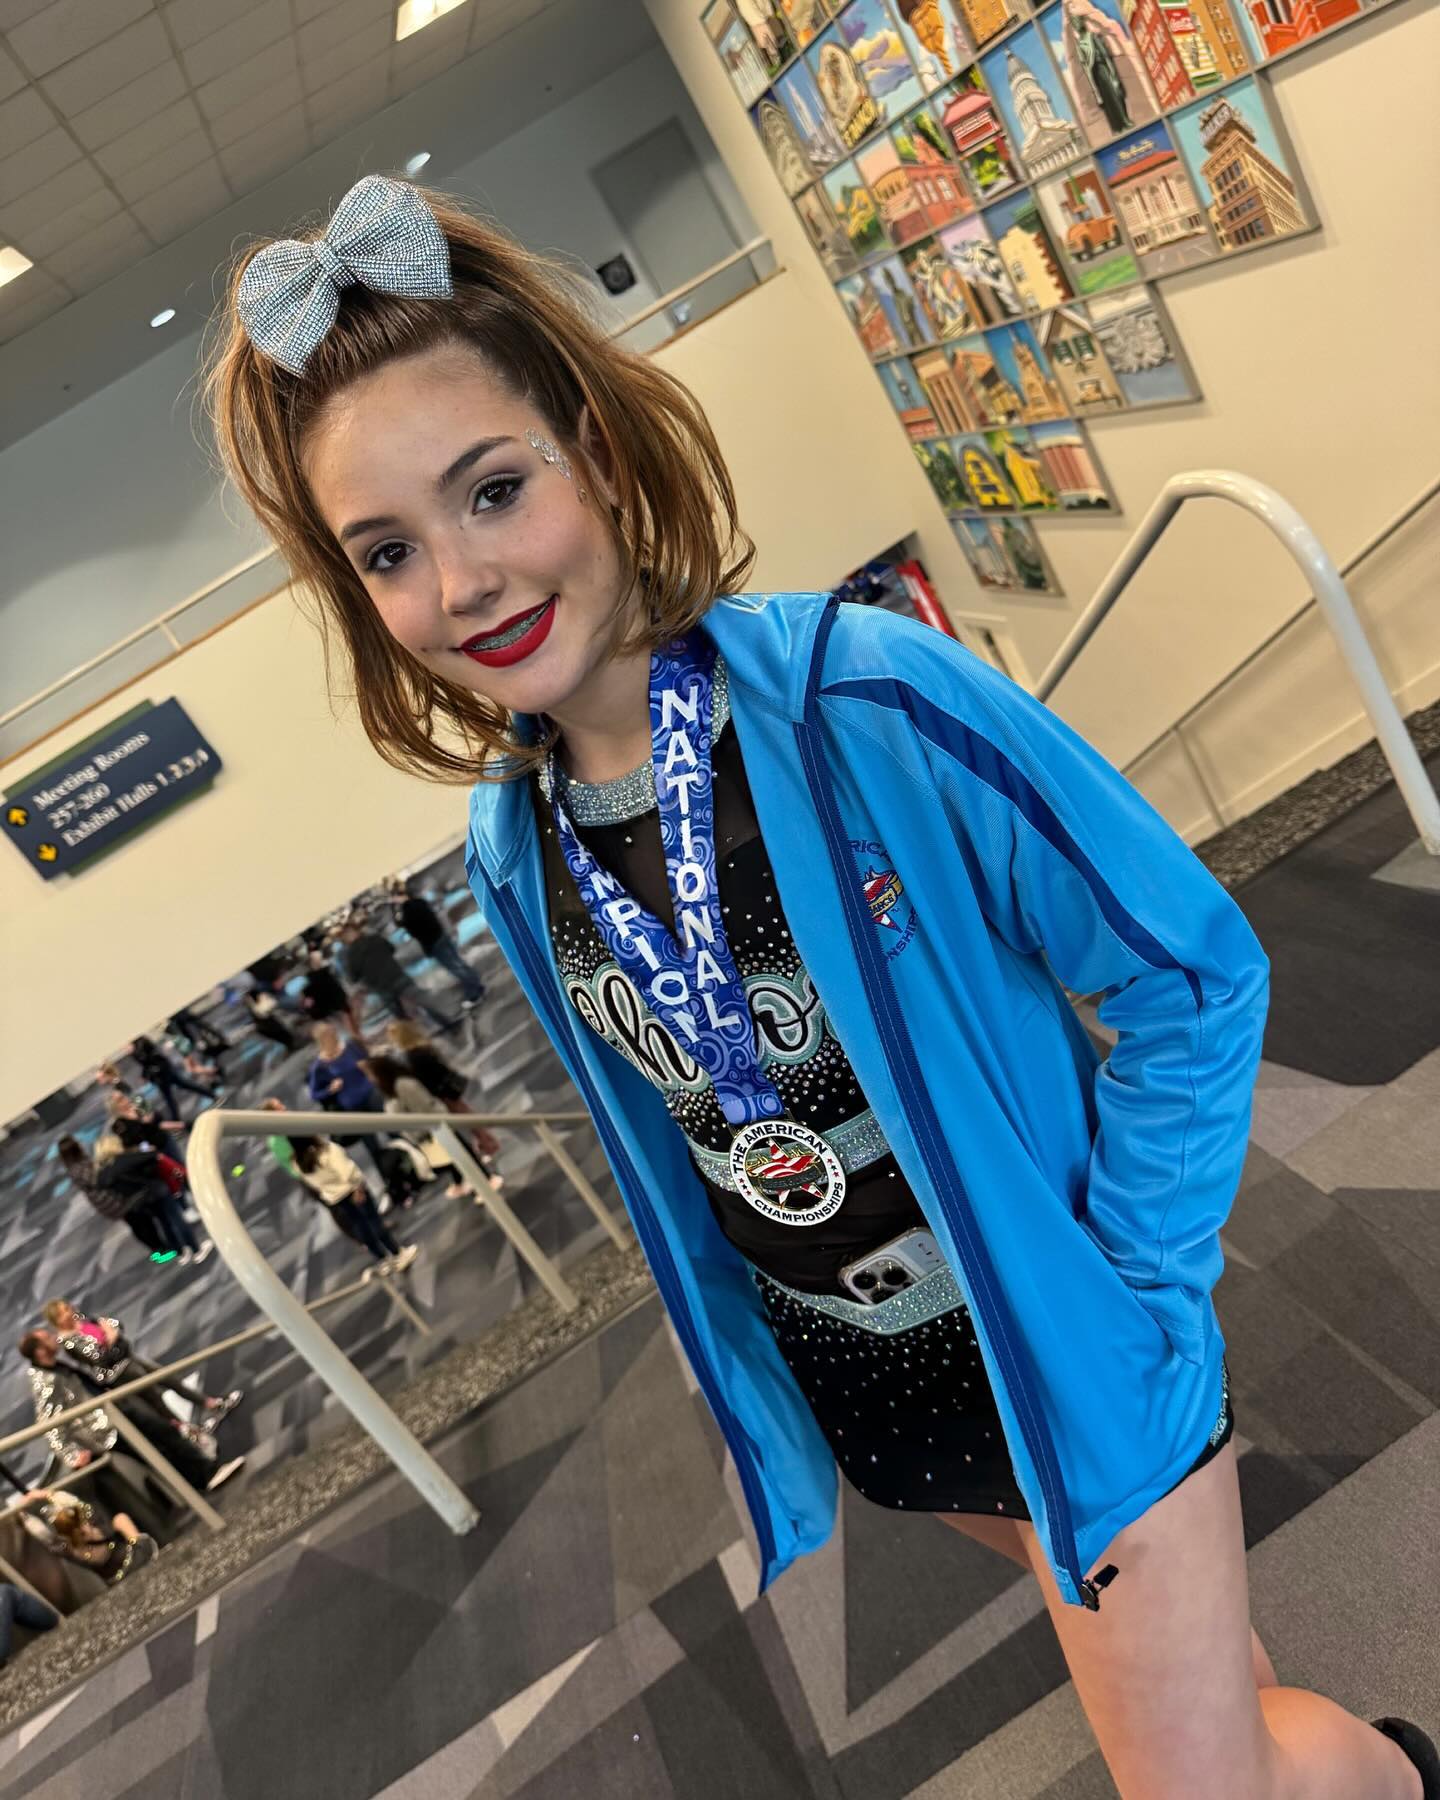 My girl took home 1st place this weekend in Salt Lake City 💙 Next stop, Regional Summit in Phoenix and then SUMMIT in Orlando. Congratulations, girlies. We’re all so proud of you. I love you, AnaBaby. 

#first #champion #competition #cheer #cheerleader #chaos #daughter #love #baby #girl #beautiful #smile #dimples #braces #pearlywhites #freckles #utah #arizona